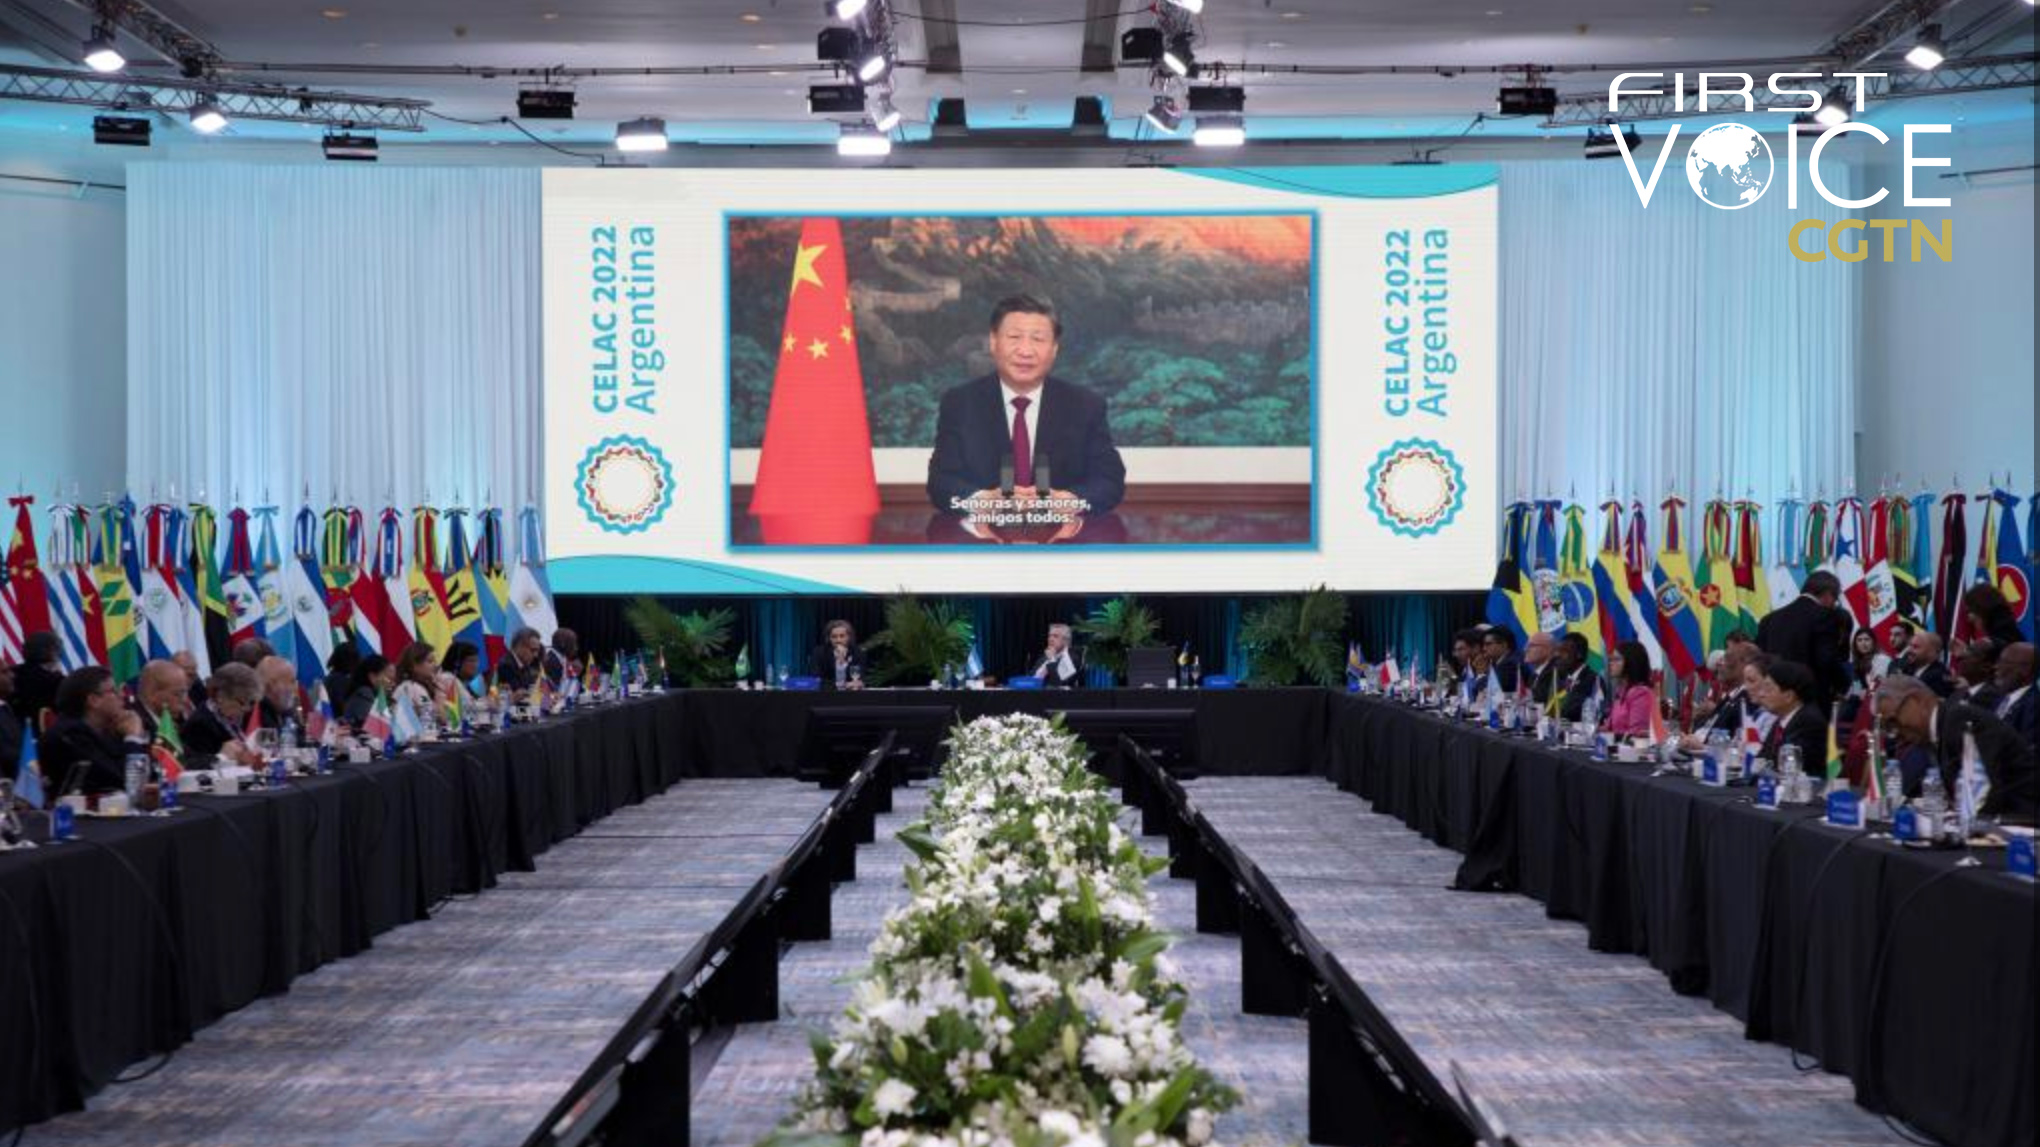 Upon the invitation of President Alberto Fernandez of Argentina, rotating president of the Community of Latin American and Caribbean States (CELAC), Chinese President Xi Jinping delivers a video address at the seventh Summit of CELAC, January 24, 2023./Xinhua
